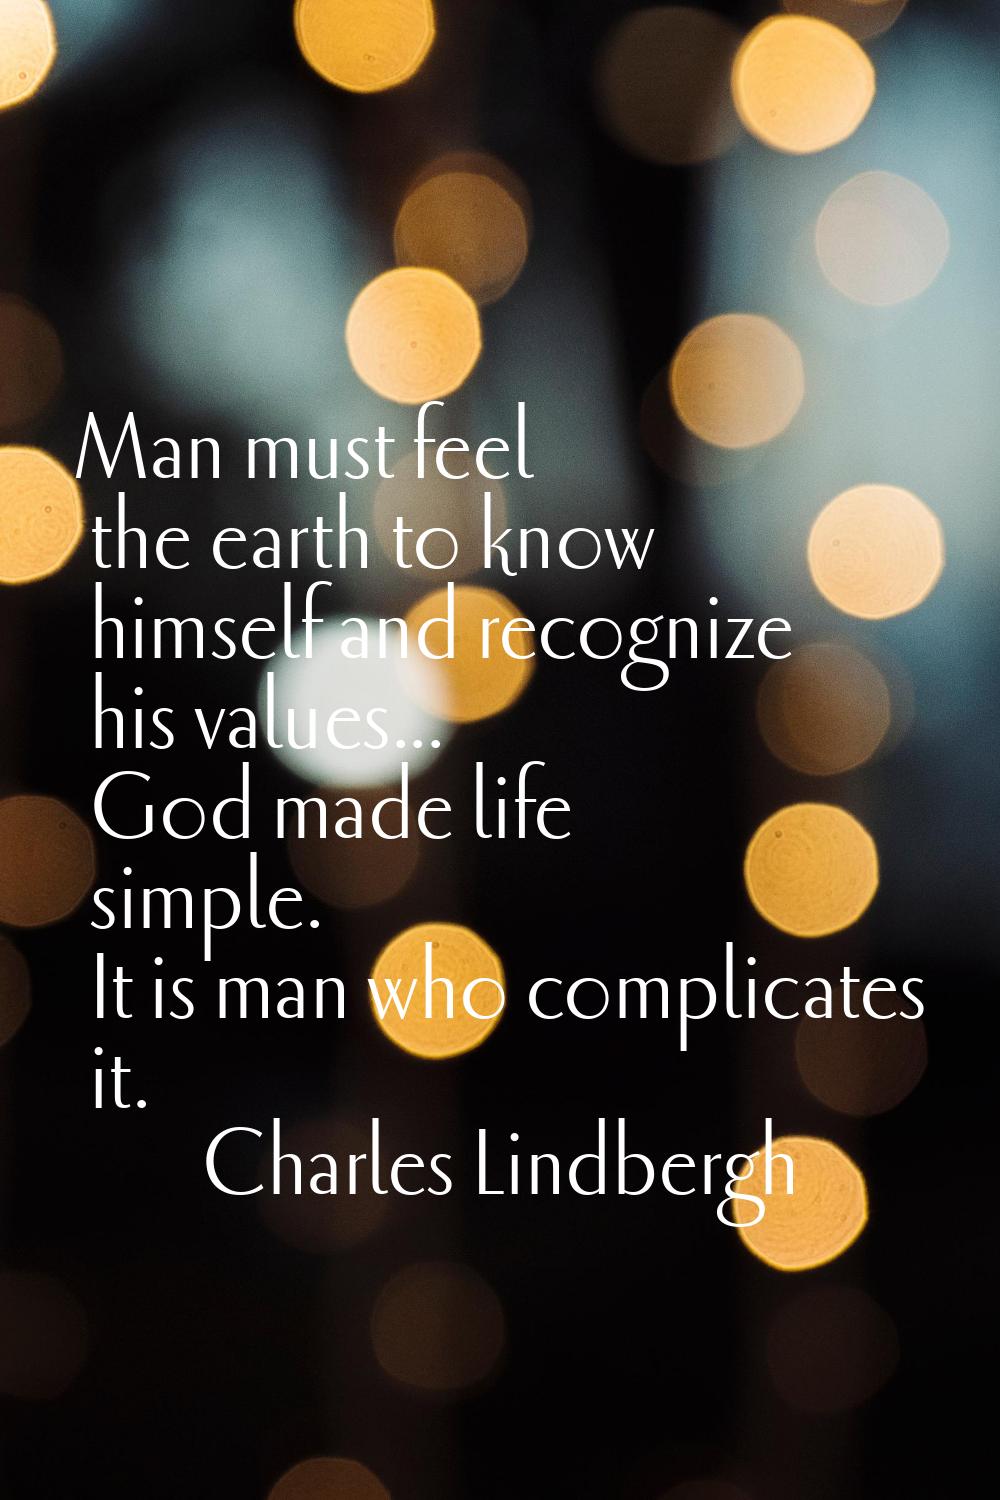 Man must feel the earth to know himself and recognize his values... God made life simple. It is man